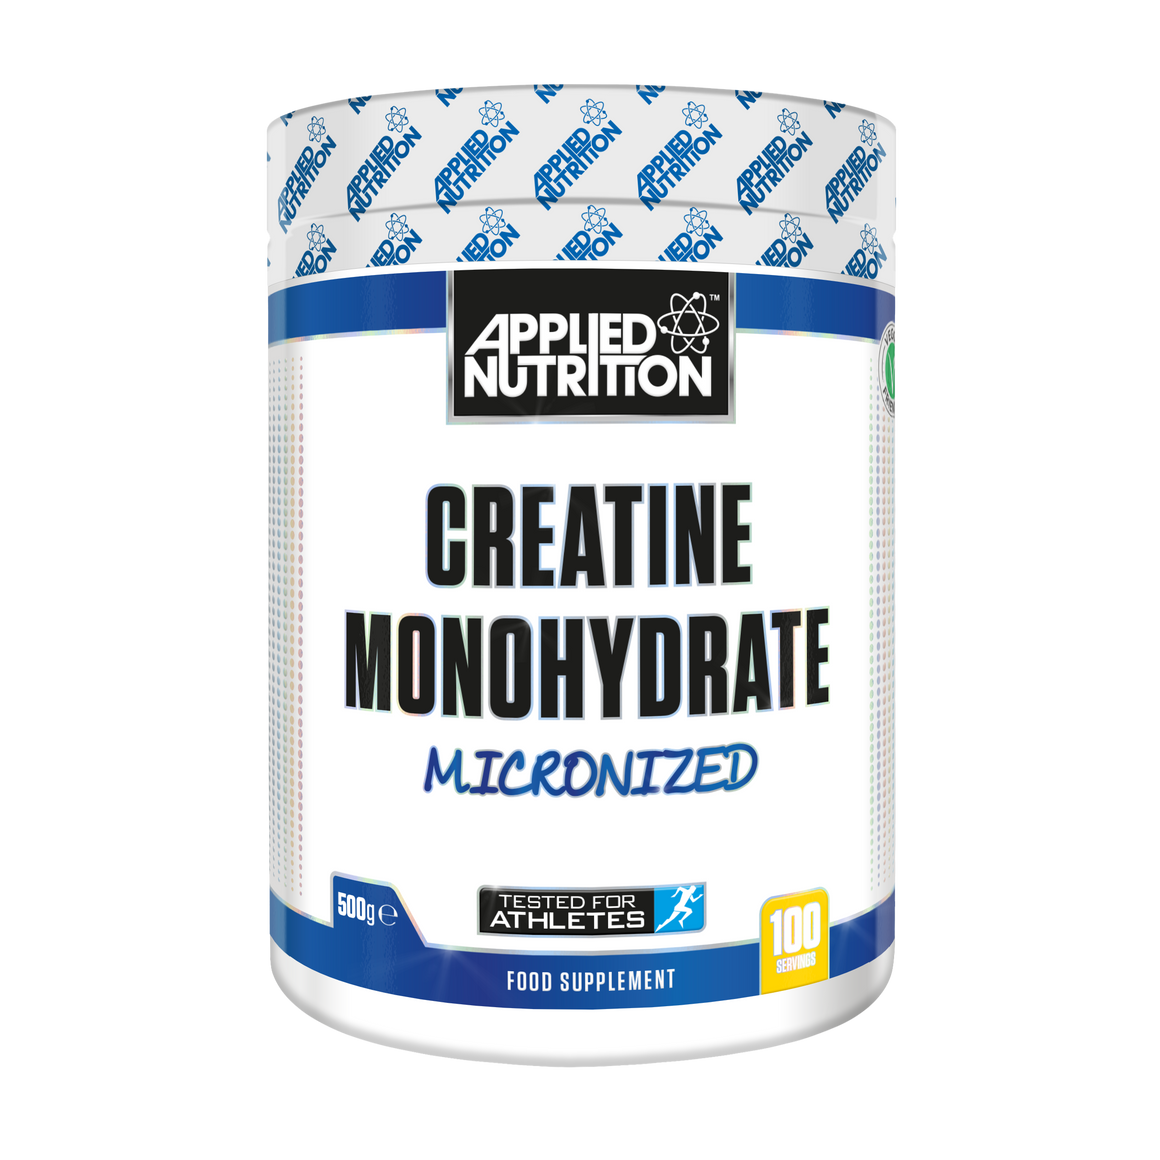 Applied Nutrition Creatine Monohydrate Micronized - 250g (50 servings)